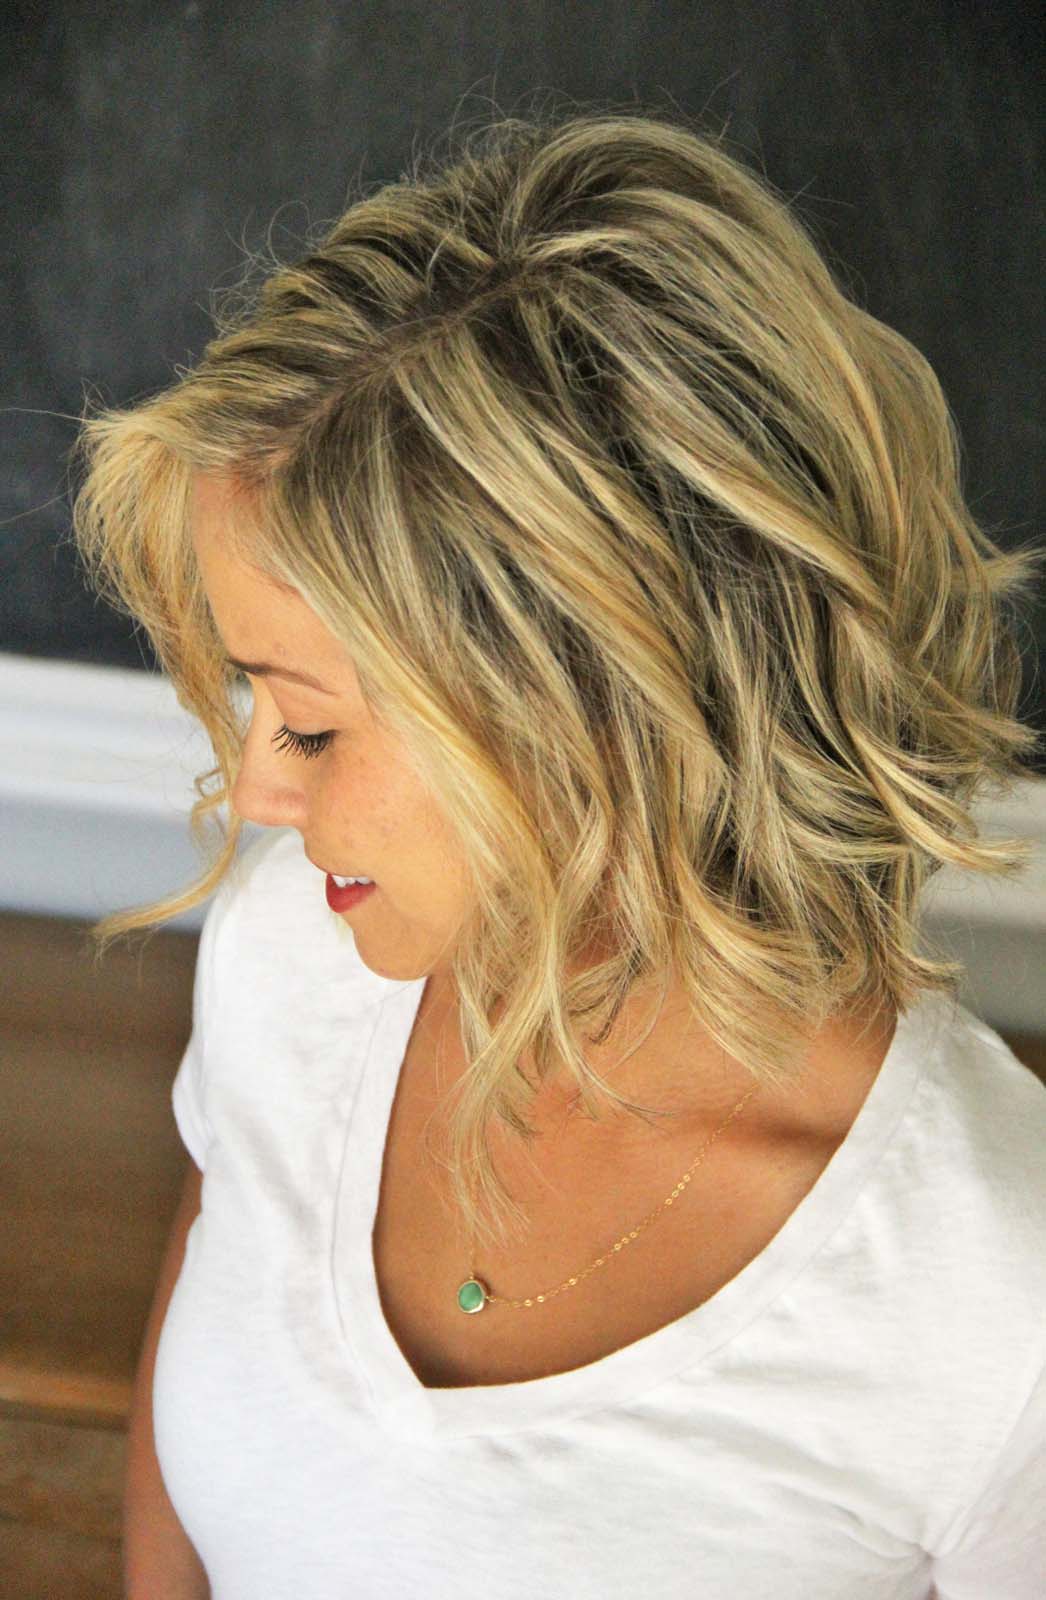 This trendy beach waves hairstyle is all the rage right now